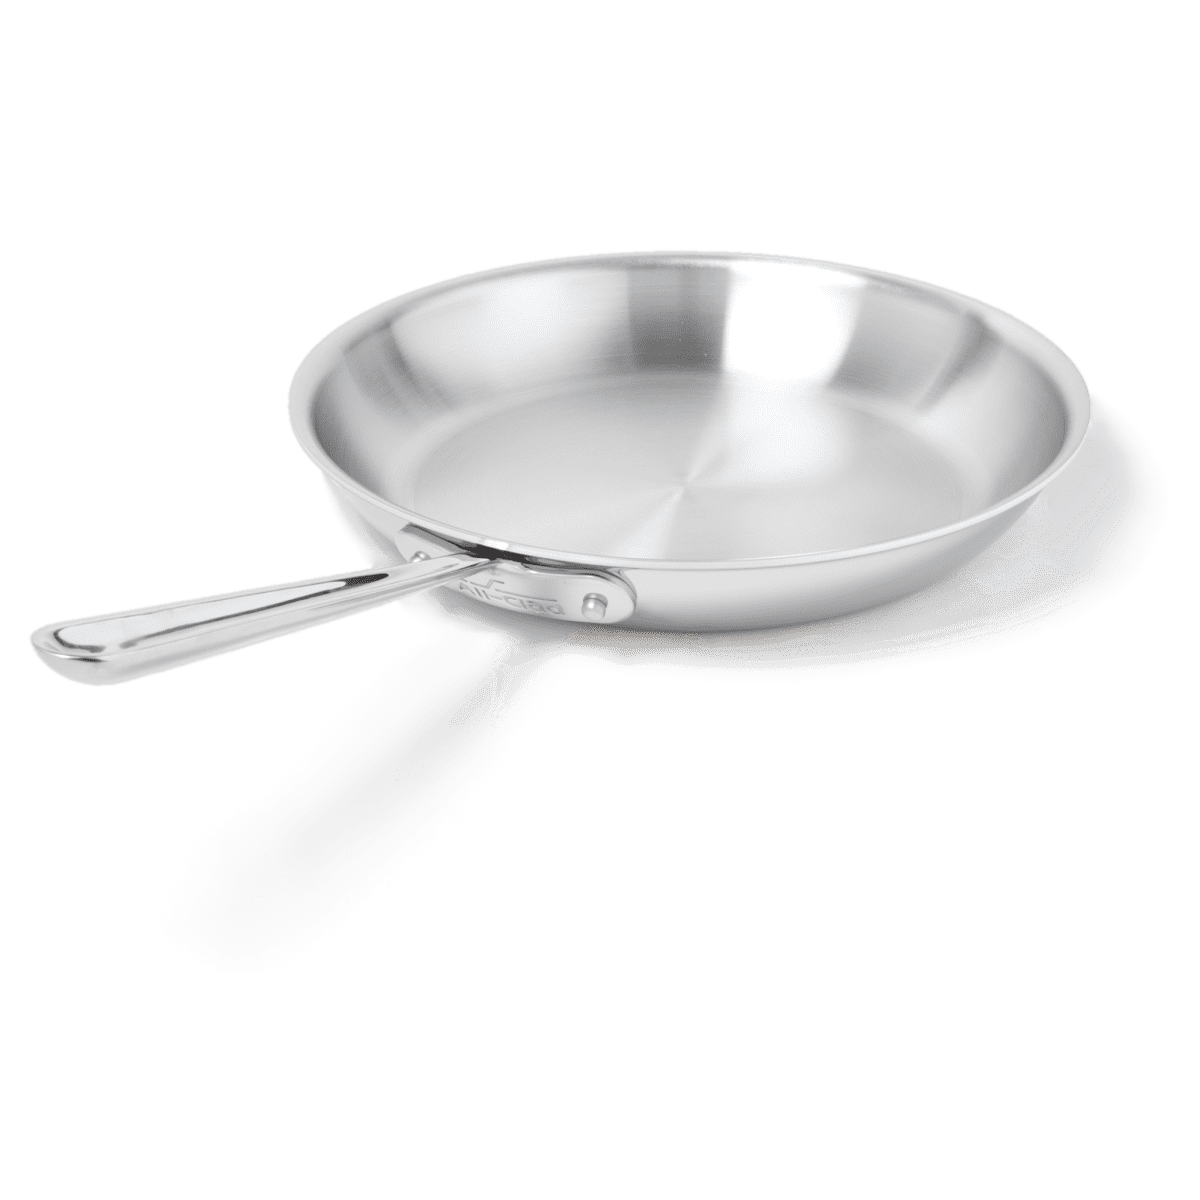 12 inch skillet with lid